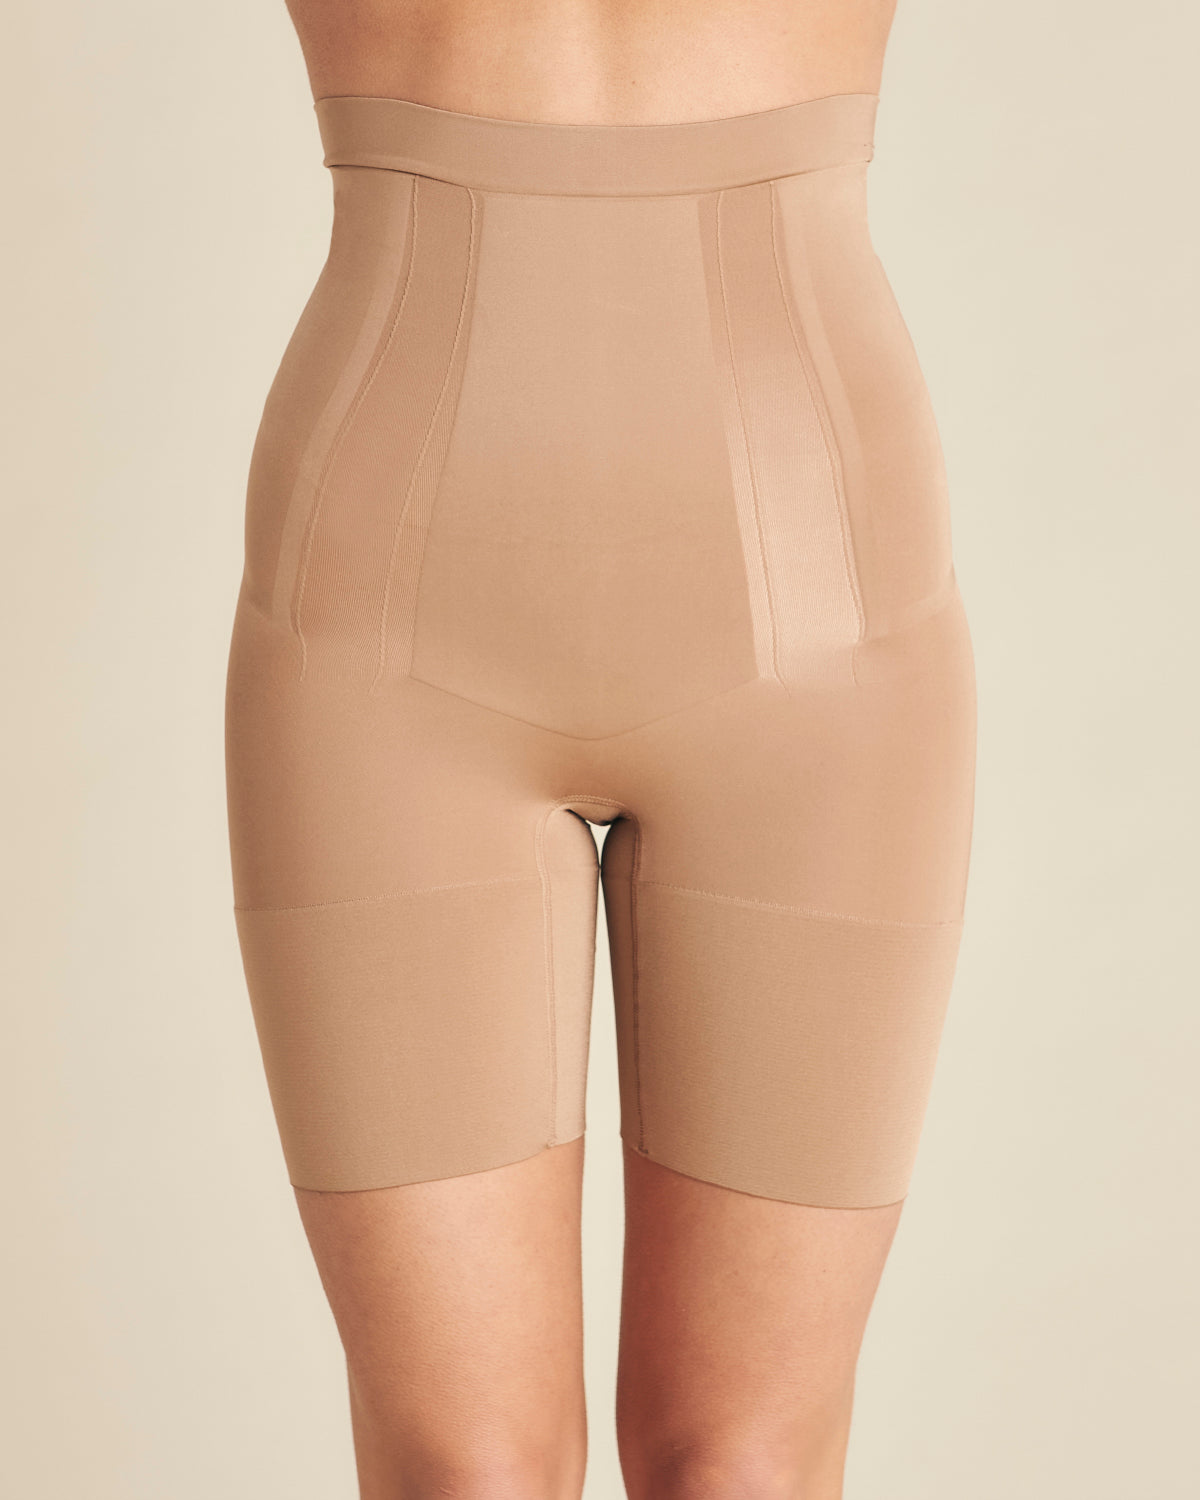 Praliné High-waisted Slimming Girdle by SPANX